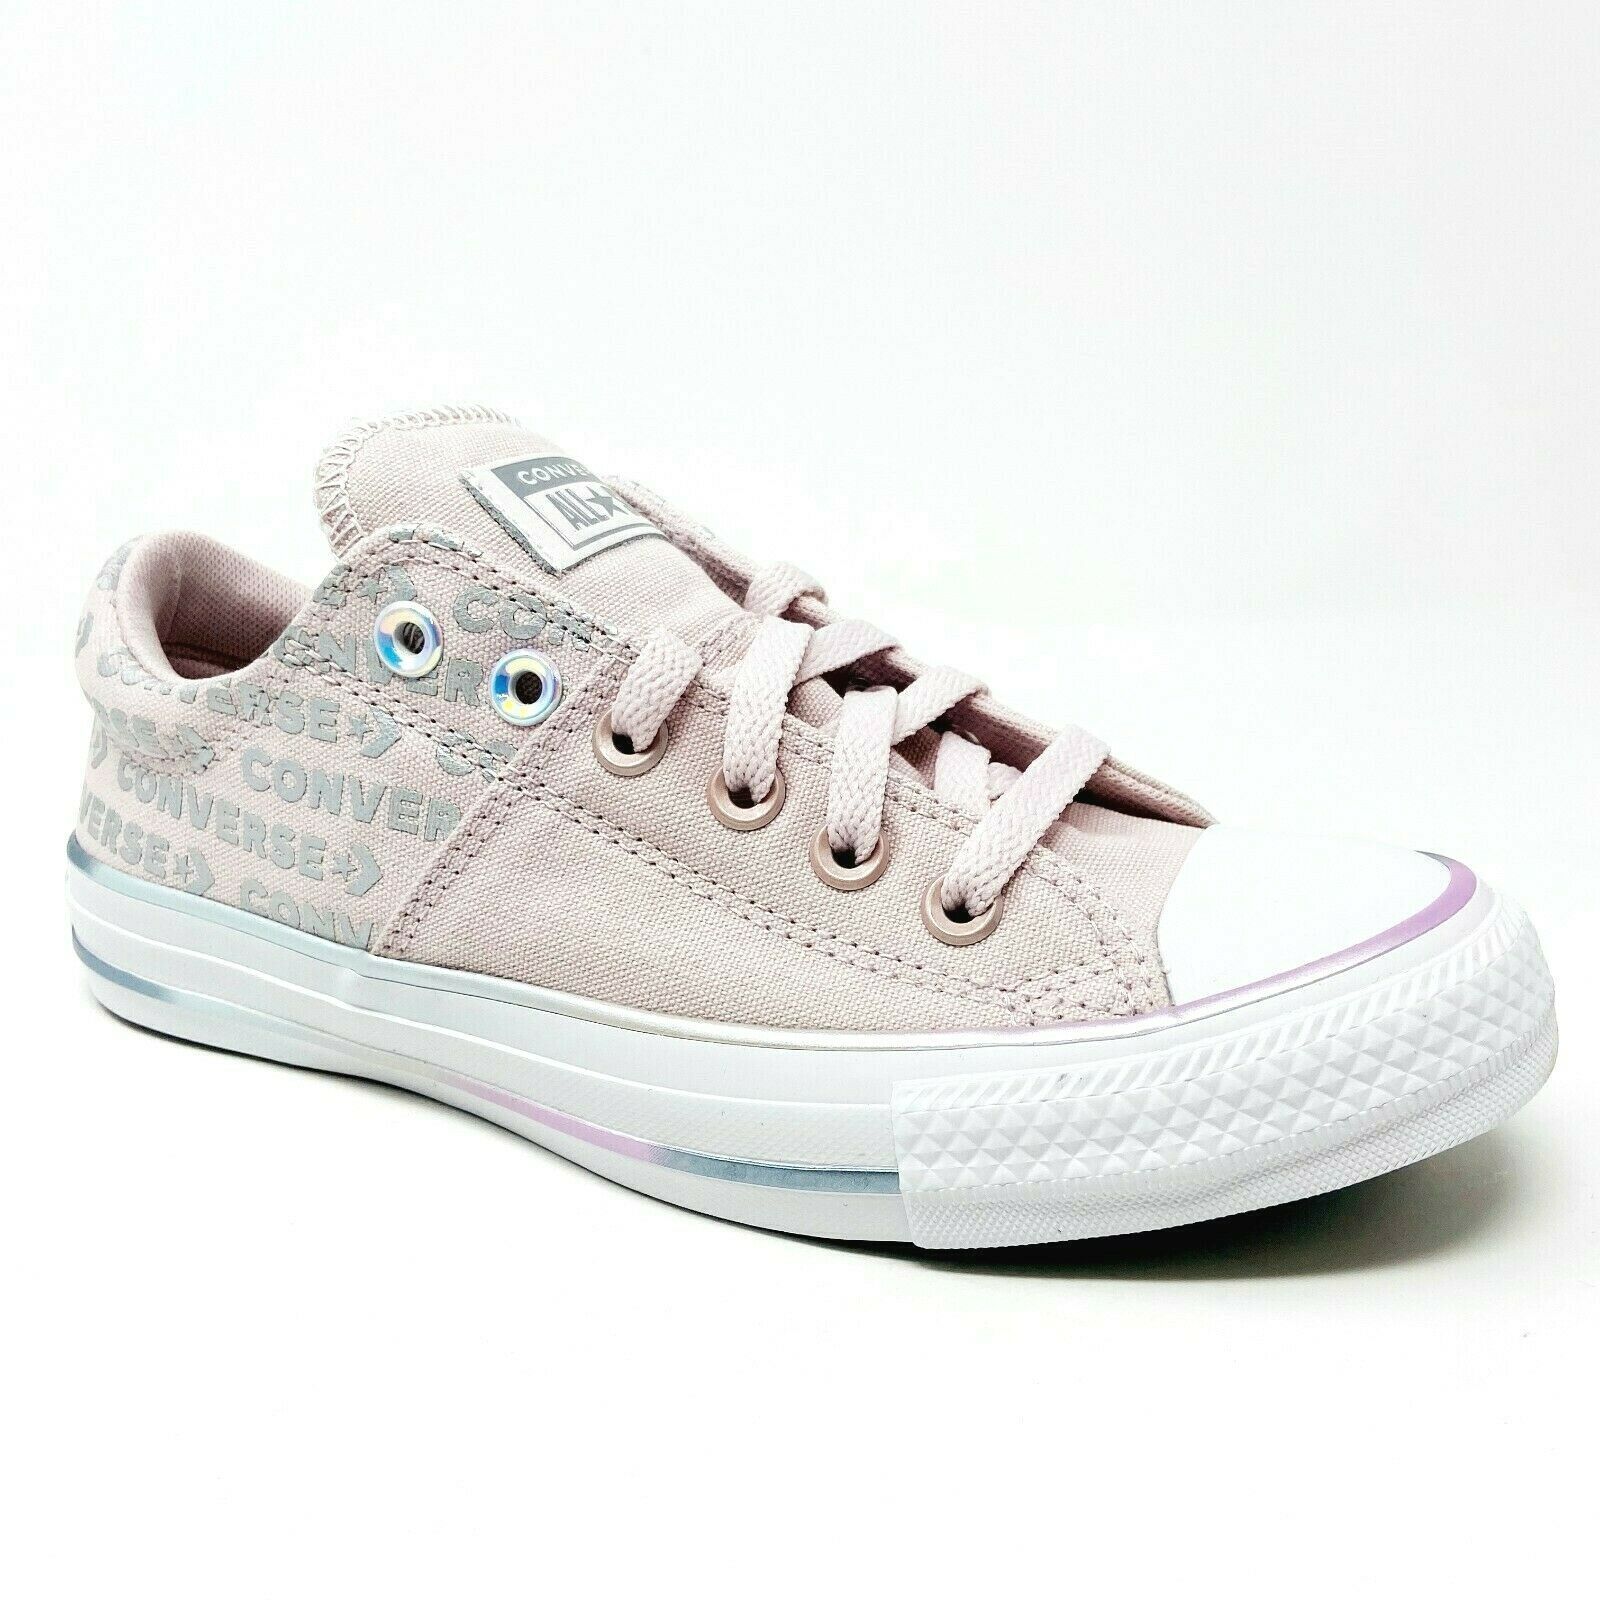 Converse Chuck Taylor All Star Madison Ox Barely Pink Womens Shoes 566103C